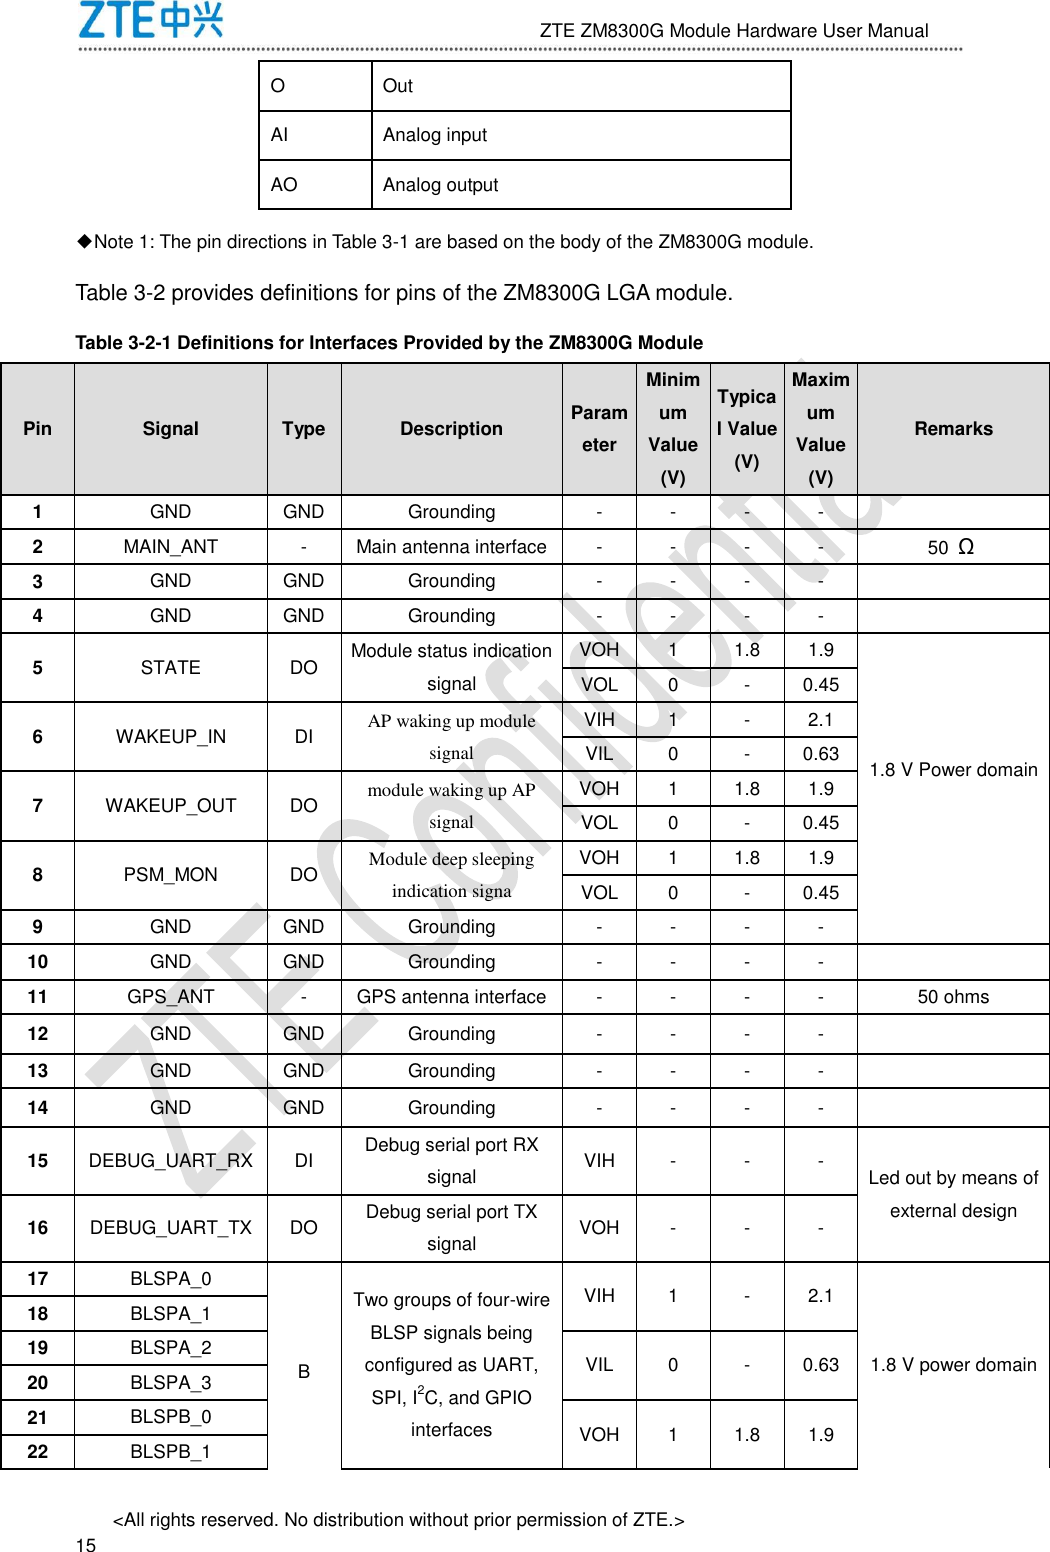                              ZTE ZM8300G Module Hardware User Manual &lt;All rights reserved. No distribution without prior permission of ZTE.&gt;                                                               15 O Out AI Analog input AO Analog output ◆Note 1: The pin directions in Table 3-1 are based on the body of the ZM8300G module. Table 3-2 provides definitions for pins of the ZM8300G LGA module. Table 3-2-1 Definitions for Interfaces Provided by the ZM8300G Module Pin Signal Type Description Parameter Minimum Value (V) Typical Value (V) Maximum Value (V) Remarks 1 GND GND Grounding - - - -  2 MAIN_ANT - Main antenna interface - - - - 50  Ω 3 GND GND Grounding - - - -  4 GND GND Grounding - - - -  5 STATE DO Module status indication signal VOH 1 1.8 1.9  1.8 V Power domain VOL 0 - 0.45 6 WAKEUP_IN DI AP waking up module signal VIH 1 - 2.1 VIL 0 - 0.63 7 WAKEUP_OUT DO module waking up AP signal VOH 1 1.8 1.9 VOL 0 - 0.45 8 PSM_MON DO Module deep sleeping indication signa VOH 1 1.8 1.9 VOL 0 - 0.45  9 GND GND Grounding - - - -  10 GND GND Grounding - - - -  11 GPS_ANT - GPS antenna interface - - - - 50 ohms 12 GND GND Grounding - - - -  13 GND GND Grounding - - - -  14 GND GND Grounding - - - -  15 DEBUG_UART_RX DI Debug serial port RX signal VIH - - - Led out by means of external design 16 DEBUG_UART_TX DO Debug serial port TX signal VOH - - - 17 BLSPA_0 B Two groups of four-wire BLSP signals being configured as UART, SPI, I2C, and GPIO interfaces VIH 1 - 2.1 1.8 V power domain 18 BLSPA_1 19 BLSPA_2 VIL 0 - 0.63 20 BLSPA_3 21 BLSPB_0 VOH 1 1.8 1.9 22 BLSPB_1 